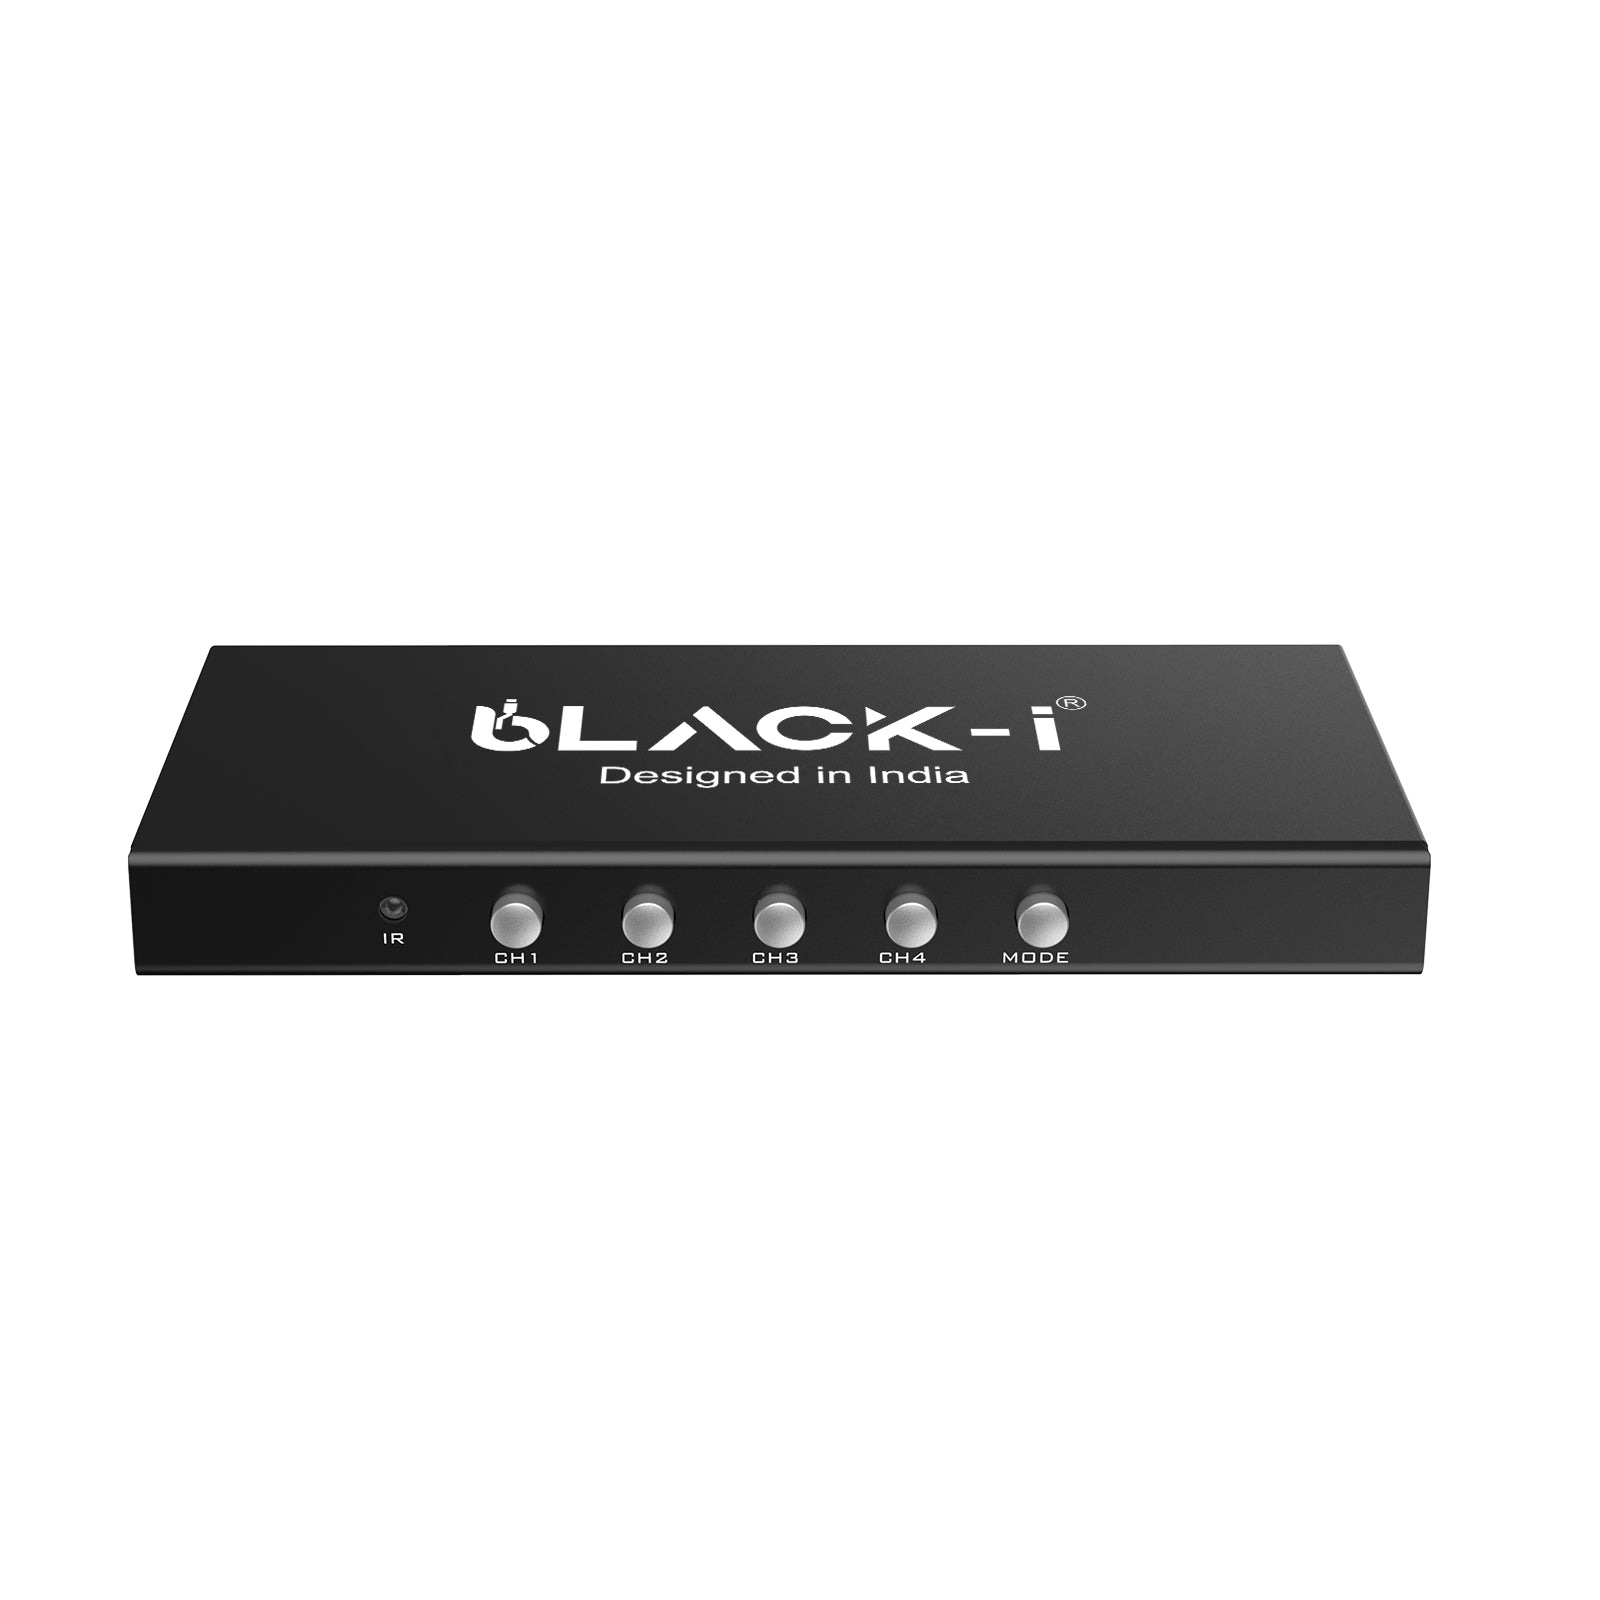 Black-i HDMI 4 Port Quad Screen Multiviewer – Expand Your Visual Experience with Simultaneous Display Control